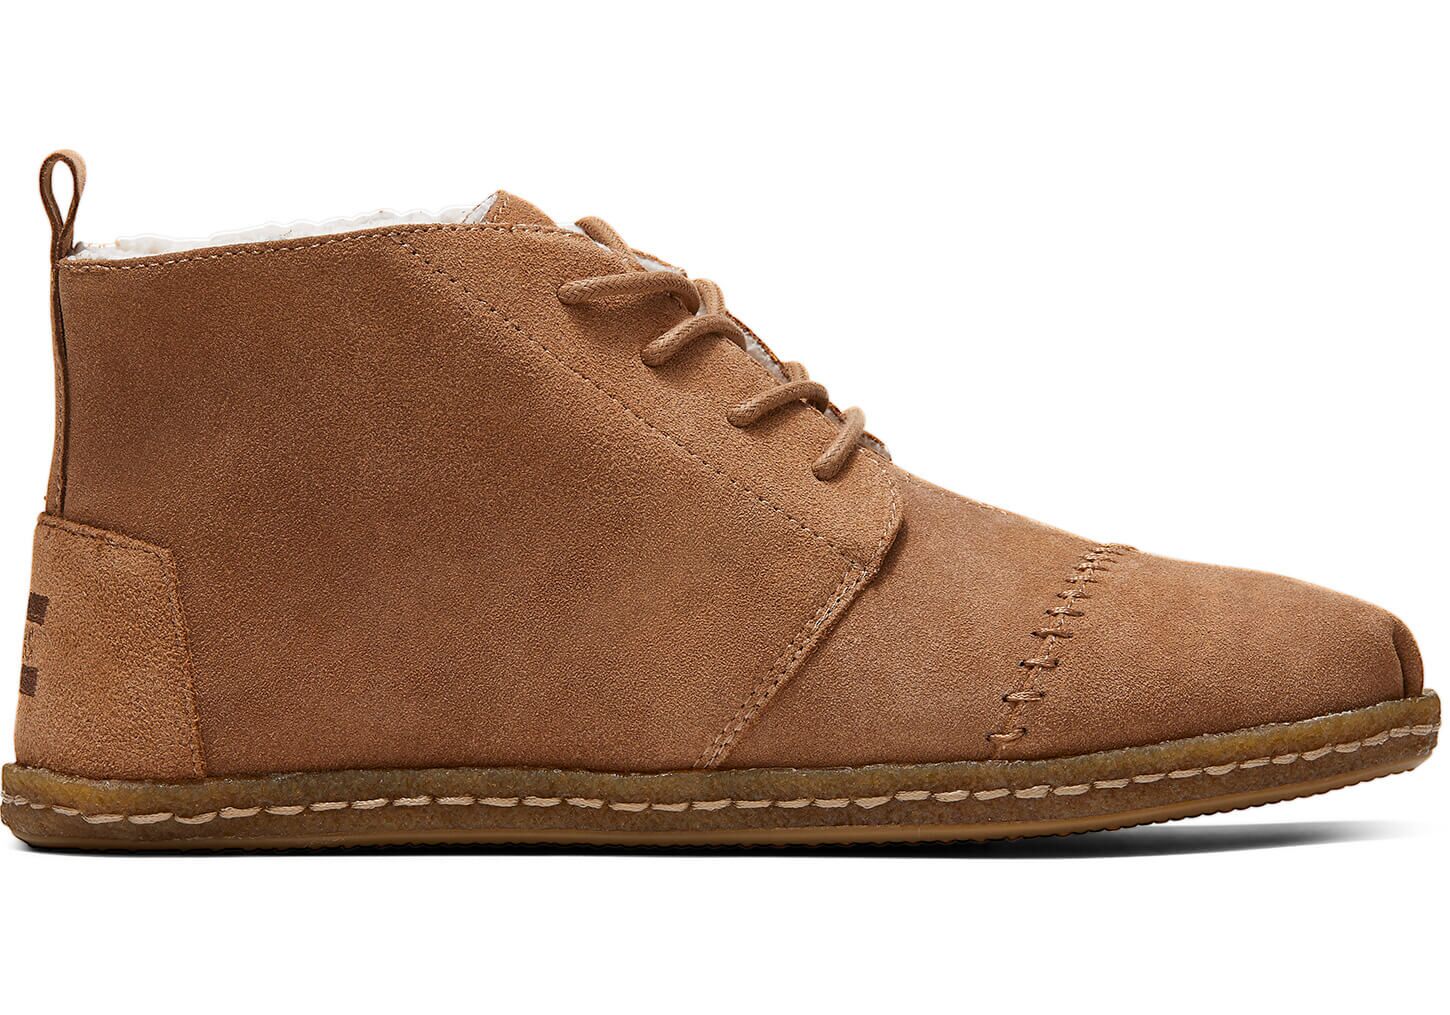 Men's Toffee Suede Faux Shearling Boots 